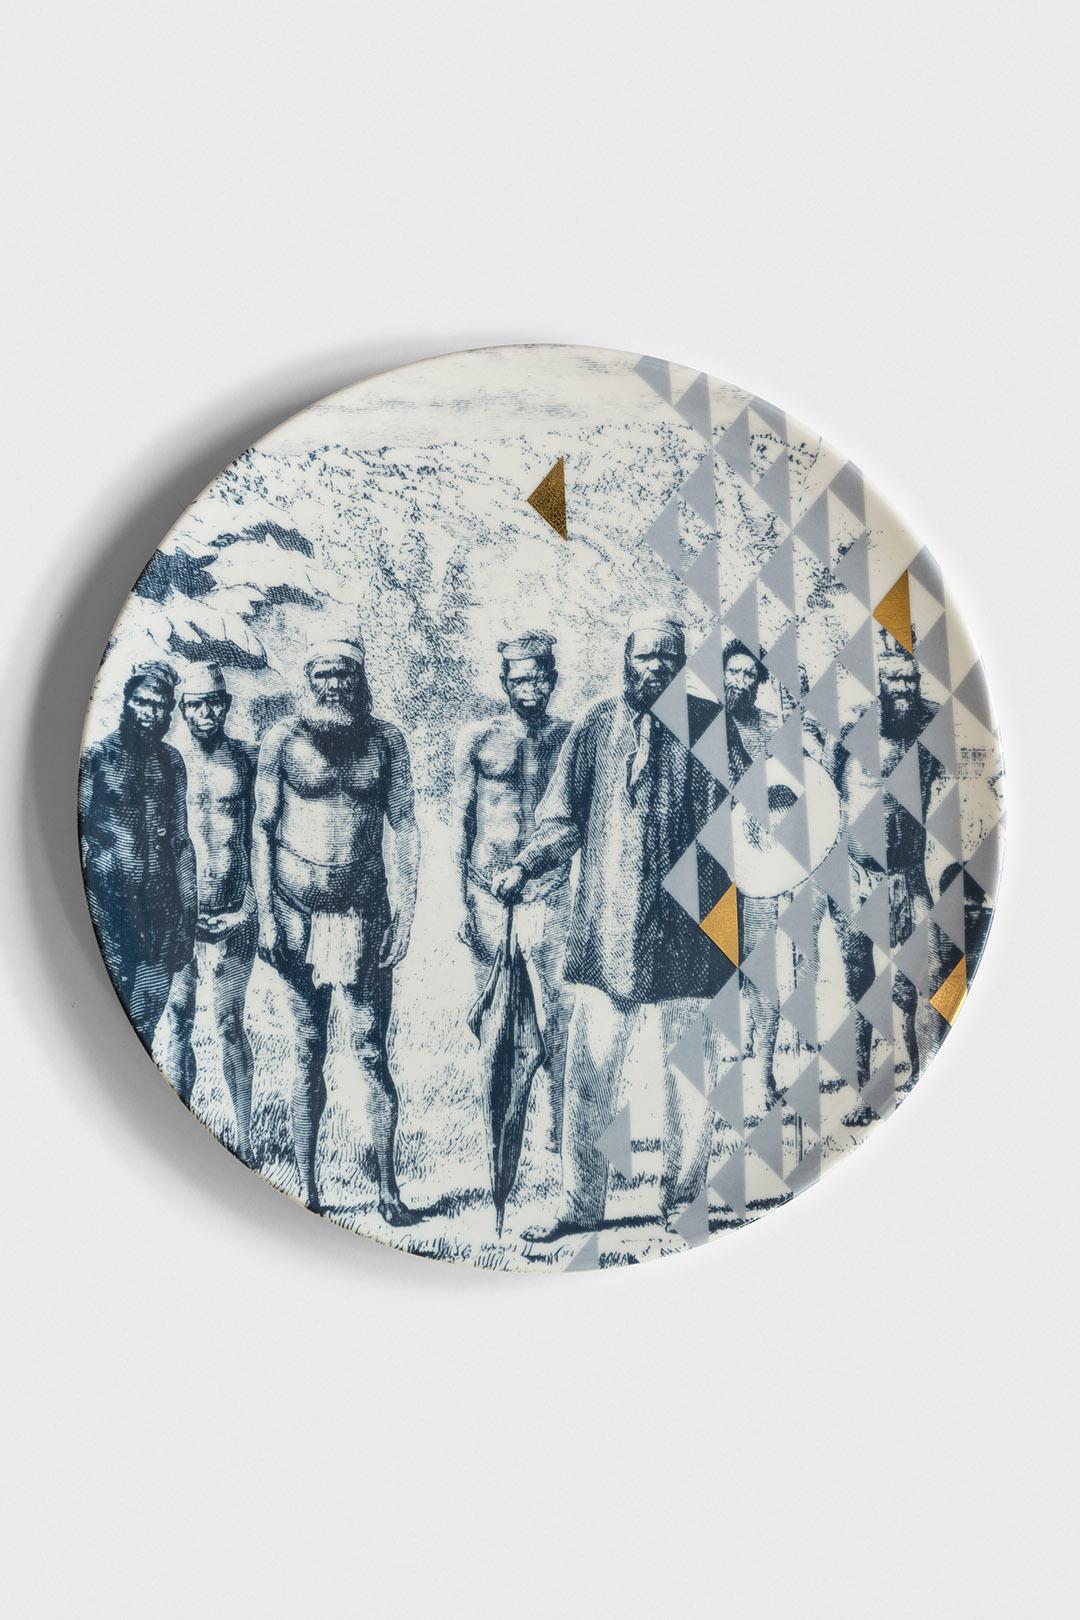 Handmade in Italy, designed by Vito Nesta.

This porcelain dinner plate representing a beautiful image from Kenya is available also in sets of 3 or 6 plates with different images from Kenya (upon request).